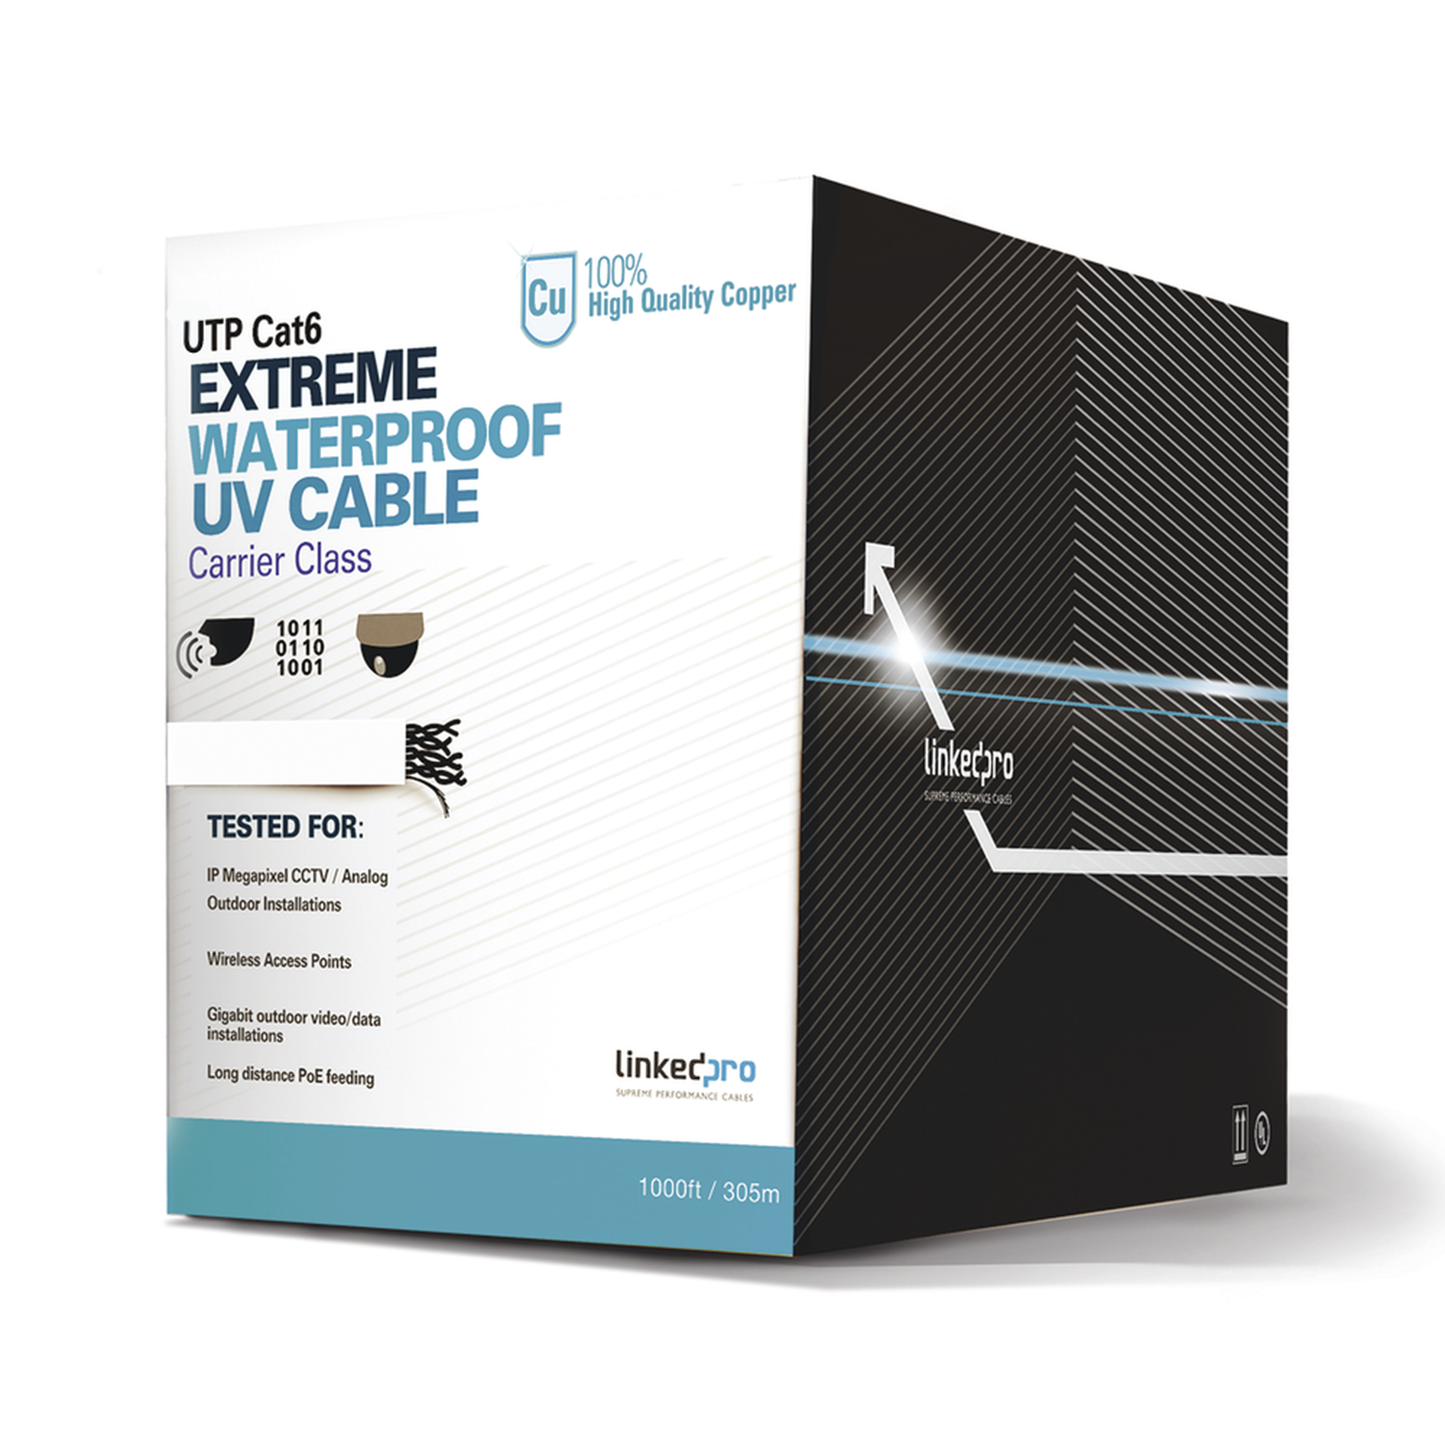 Cat6 UTP cable for outdoor, white, 1000 ft (305 m), for video surveillance applications, data networks.